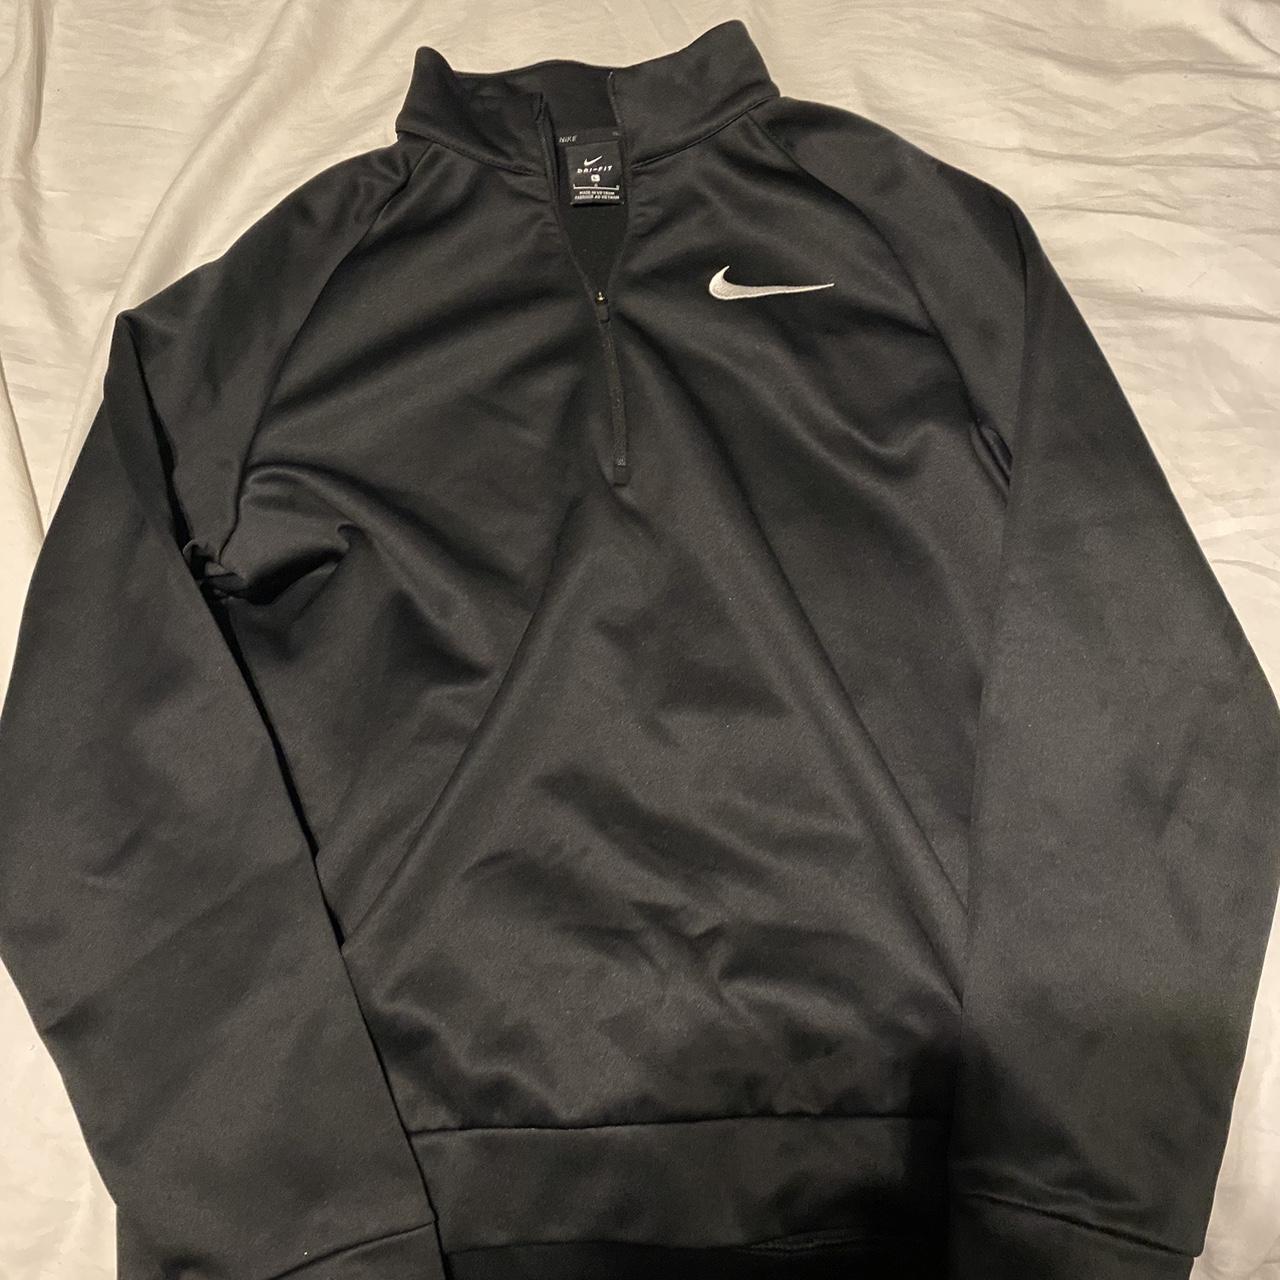 nike half zip crew neck , no stains or tears, size... - Depop